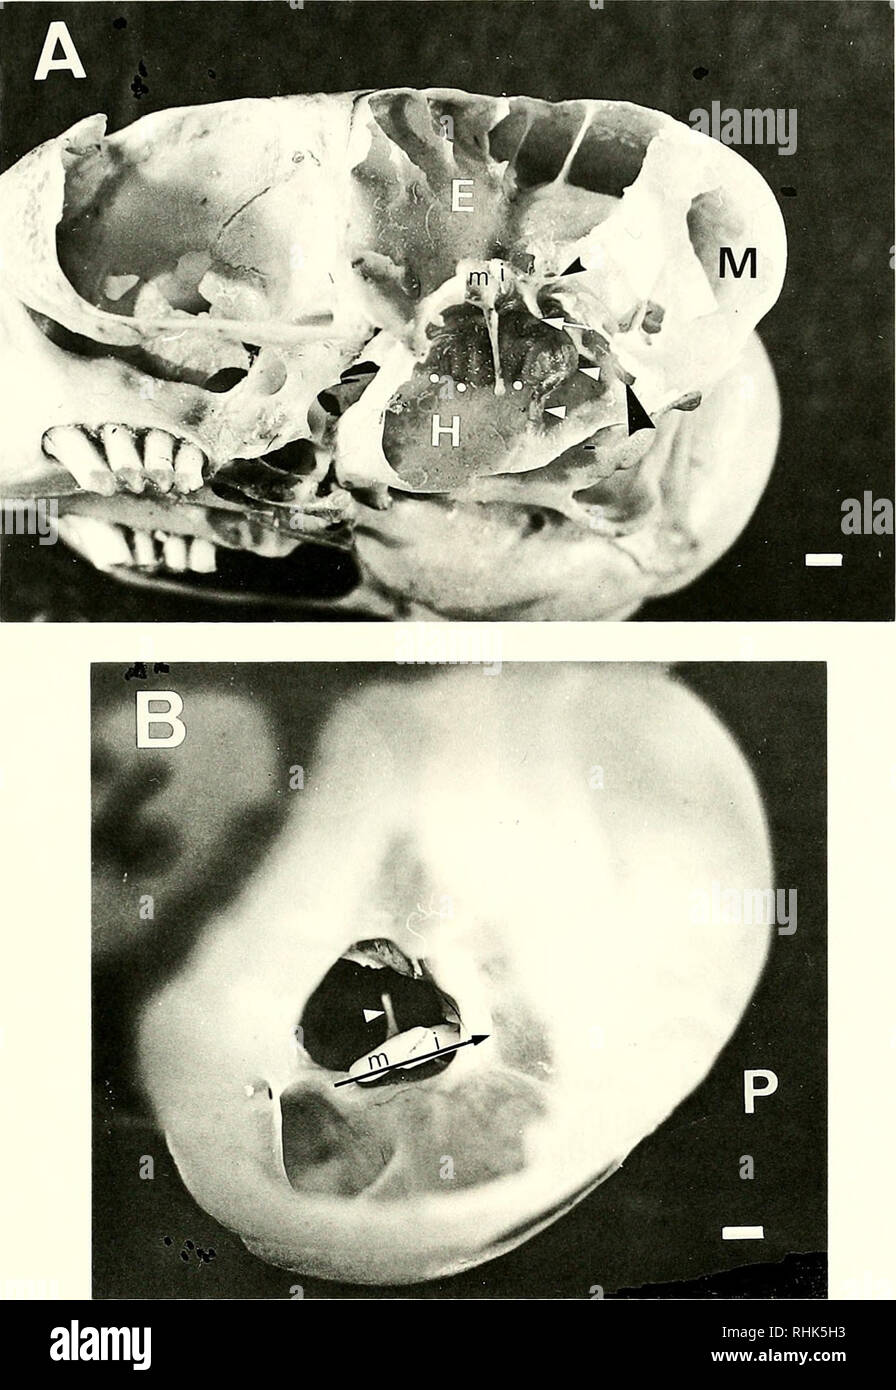 . Biology of the Heteromyidae. Heteromyidae. HETEROMYID EAR 273. Fig. 3A.—Middle ear cavity of Dipodomys ordii DML 4755 as seen ventrolaterally. E = epitym- panum, H = hypotympanum, M = mastoid, m = malleus, i = incus, small white dots = ventral margin of cochlea, white arrow = articulation between long processes of incus and stapes, small white arrowheads = bony canal for stapedial artery, large black arrowhead = site of communication between mastoid and hypotympanic chambers, small black arrowhead = short process of incus. B. The epitympanum of Z). deserti DML 4637. P = posterior, m = malleu Stock Photo